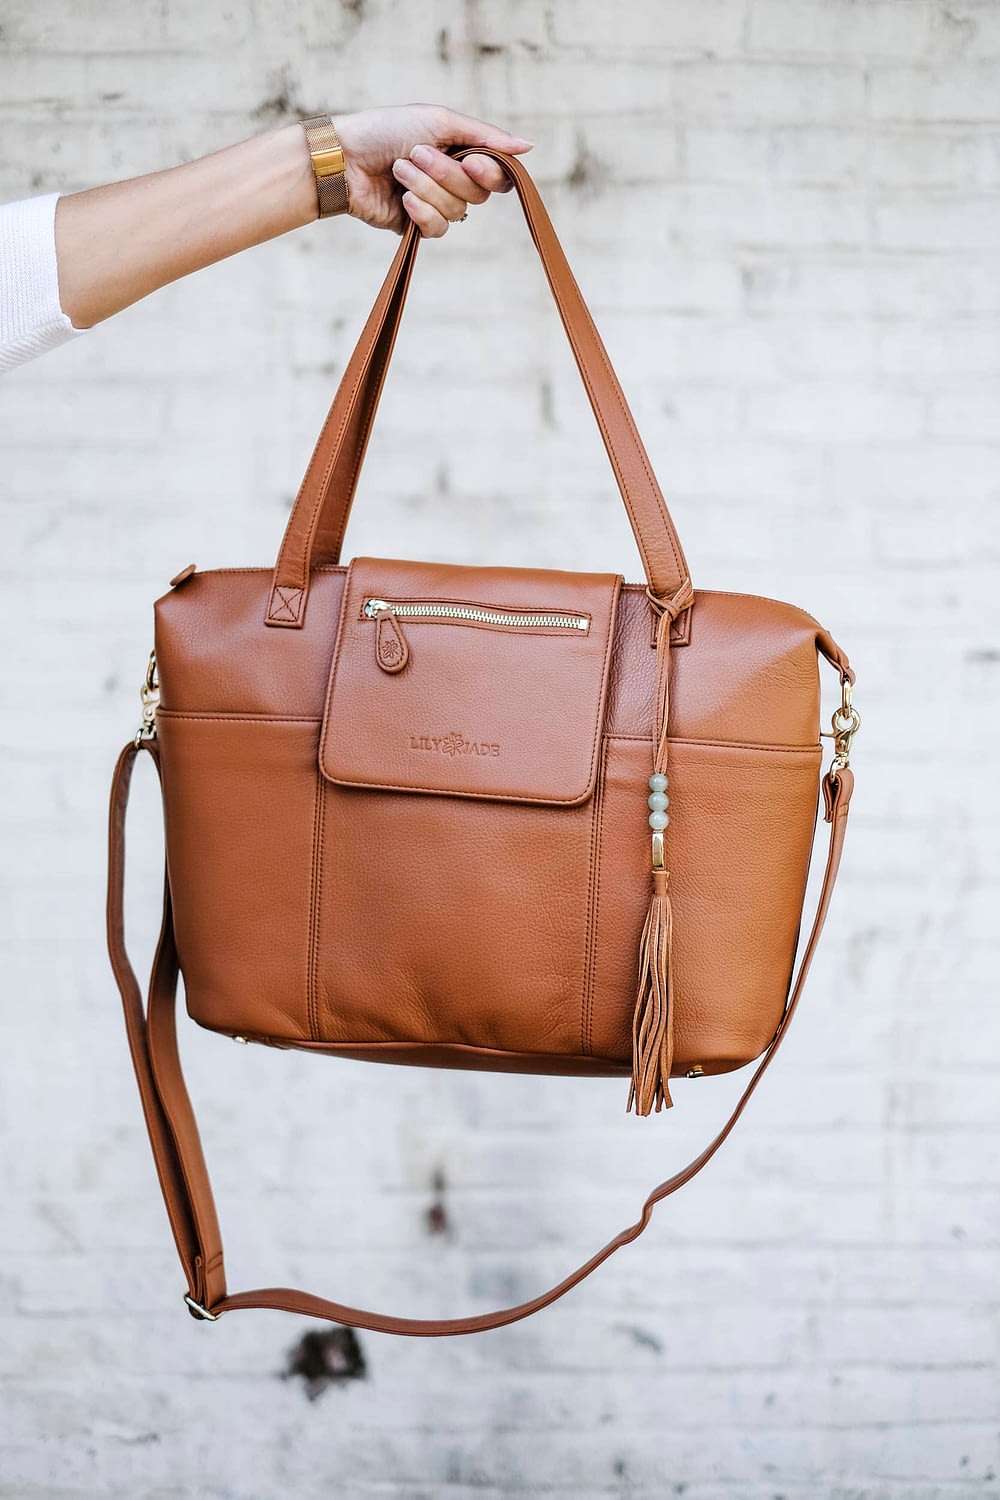 leather diaper bag with multiple straps held in front of white wall